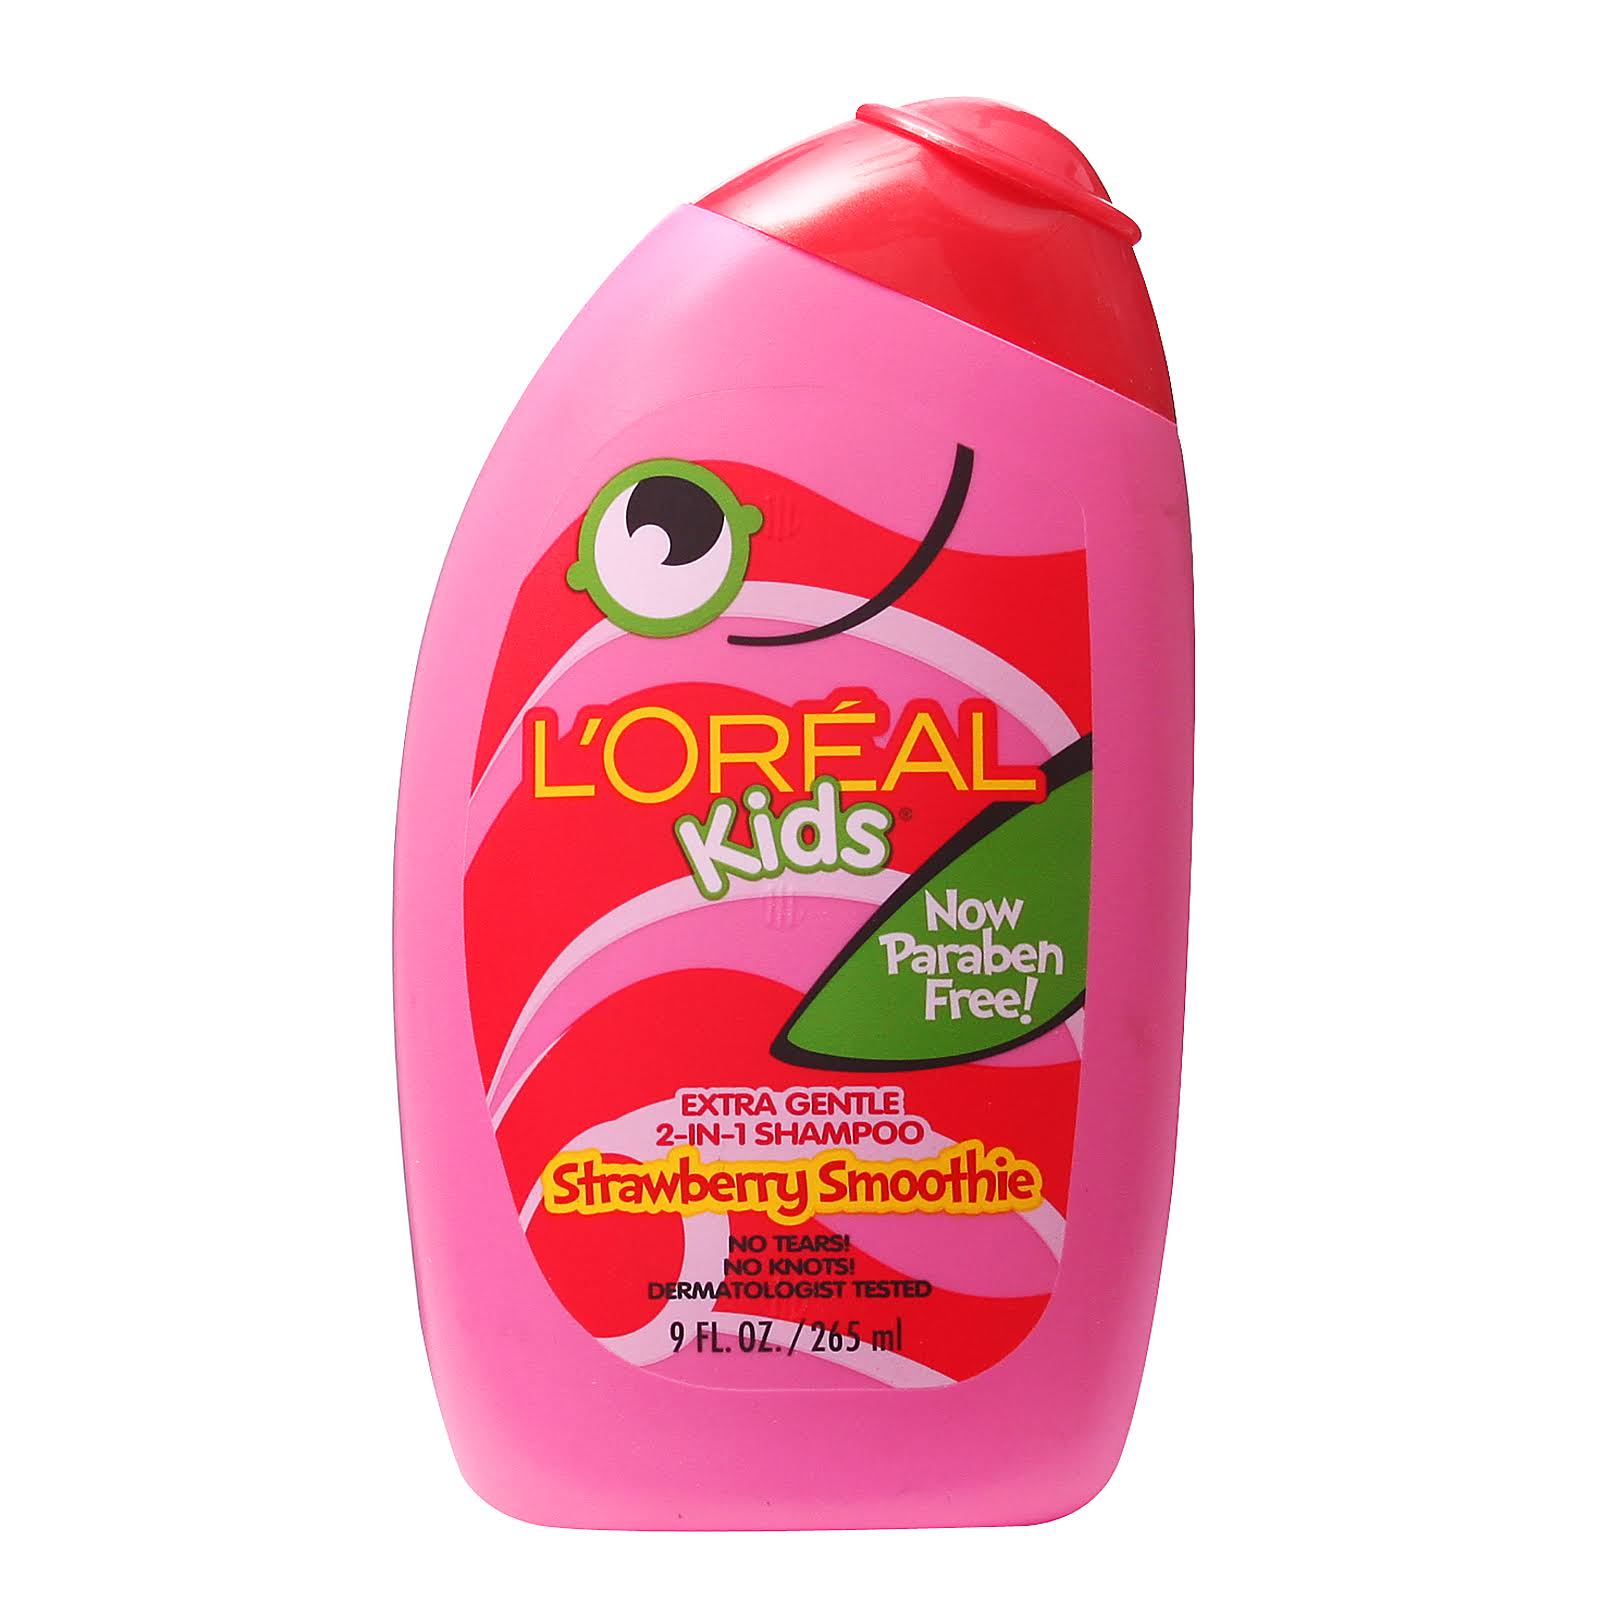 L'Oréal Kids 2-In-1 Shampoo - Strawberry Smoothie, 265ml